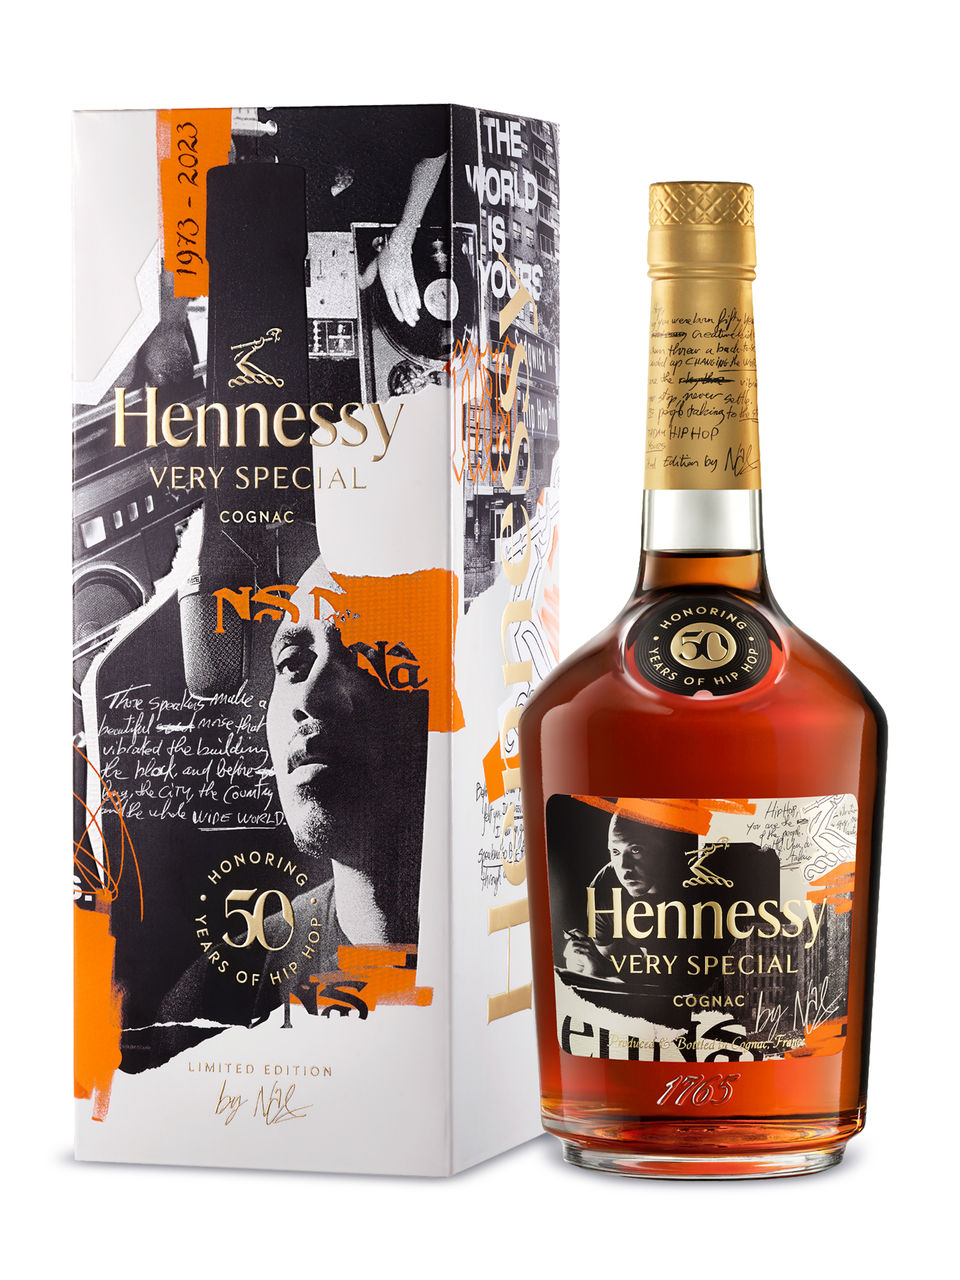 Buy Éditions limitées Hennessy France